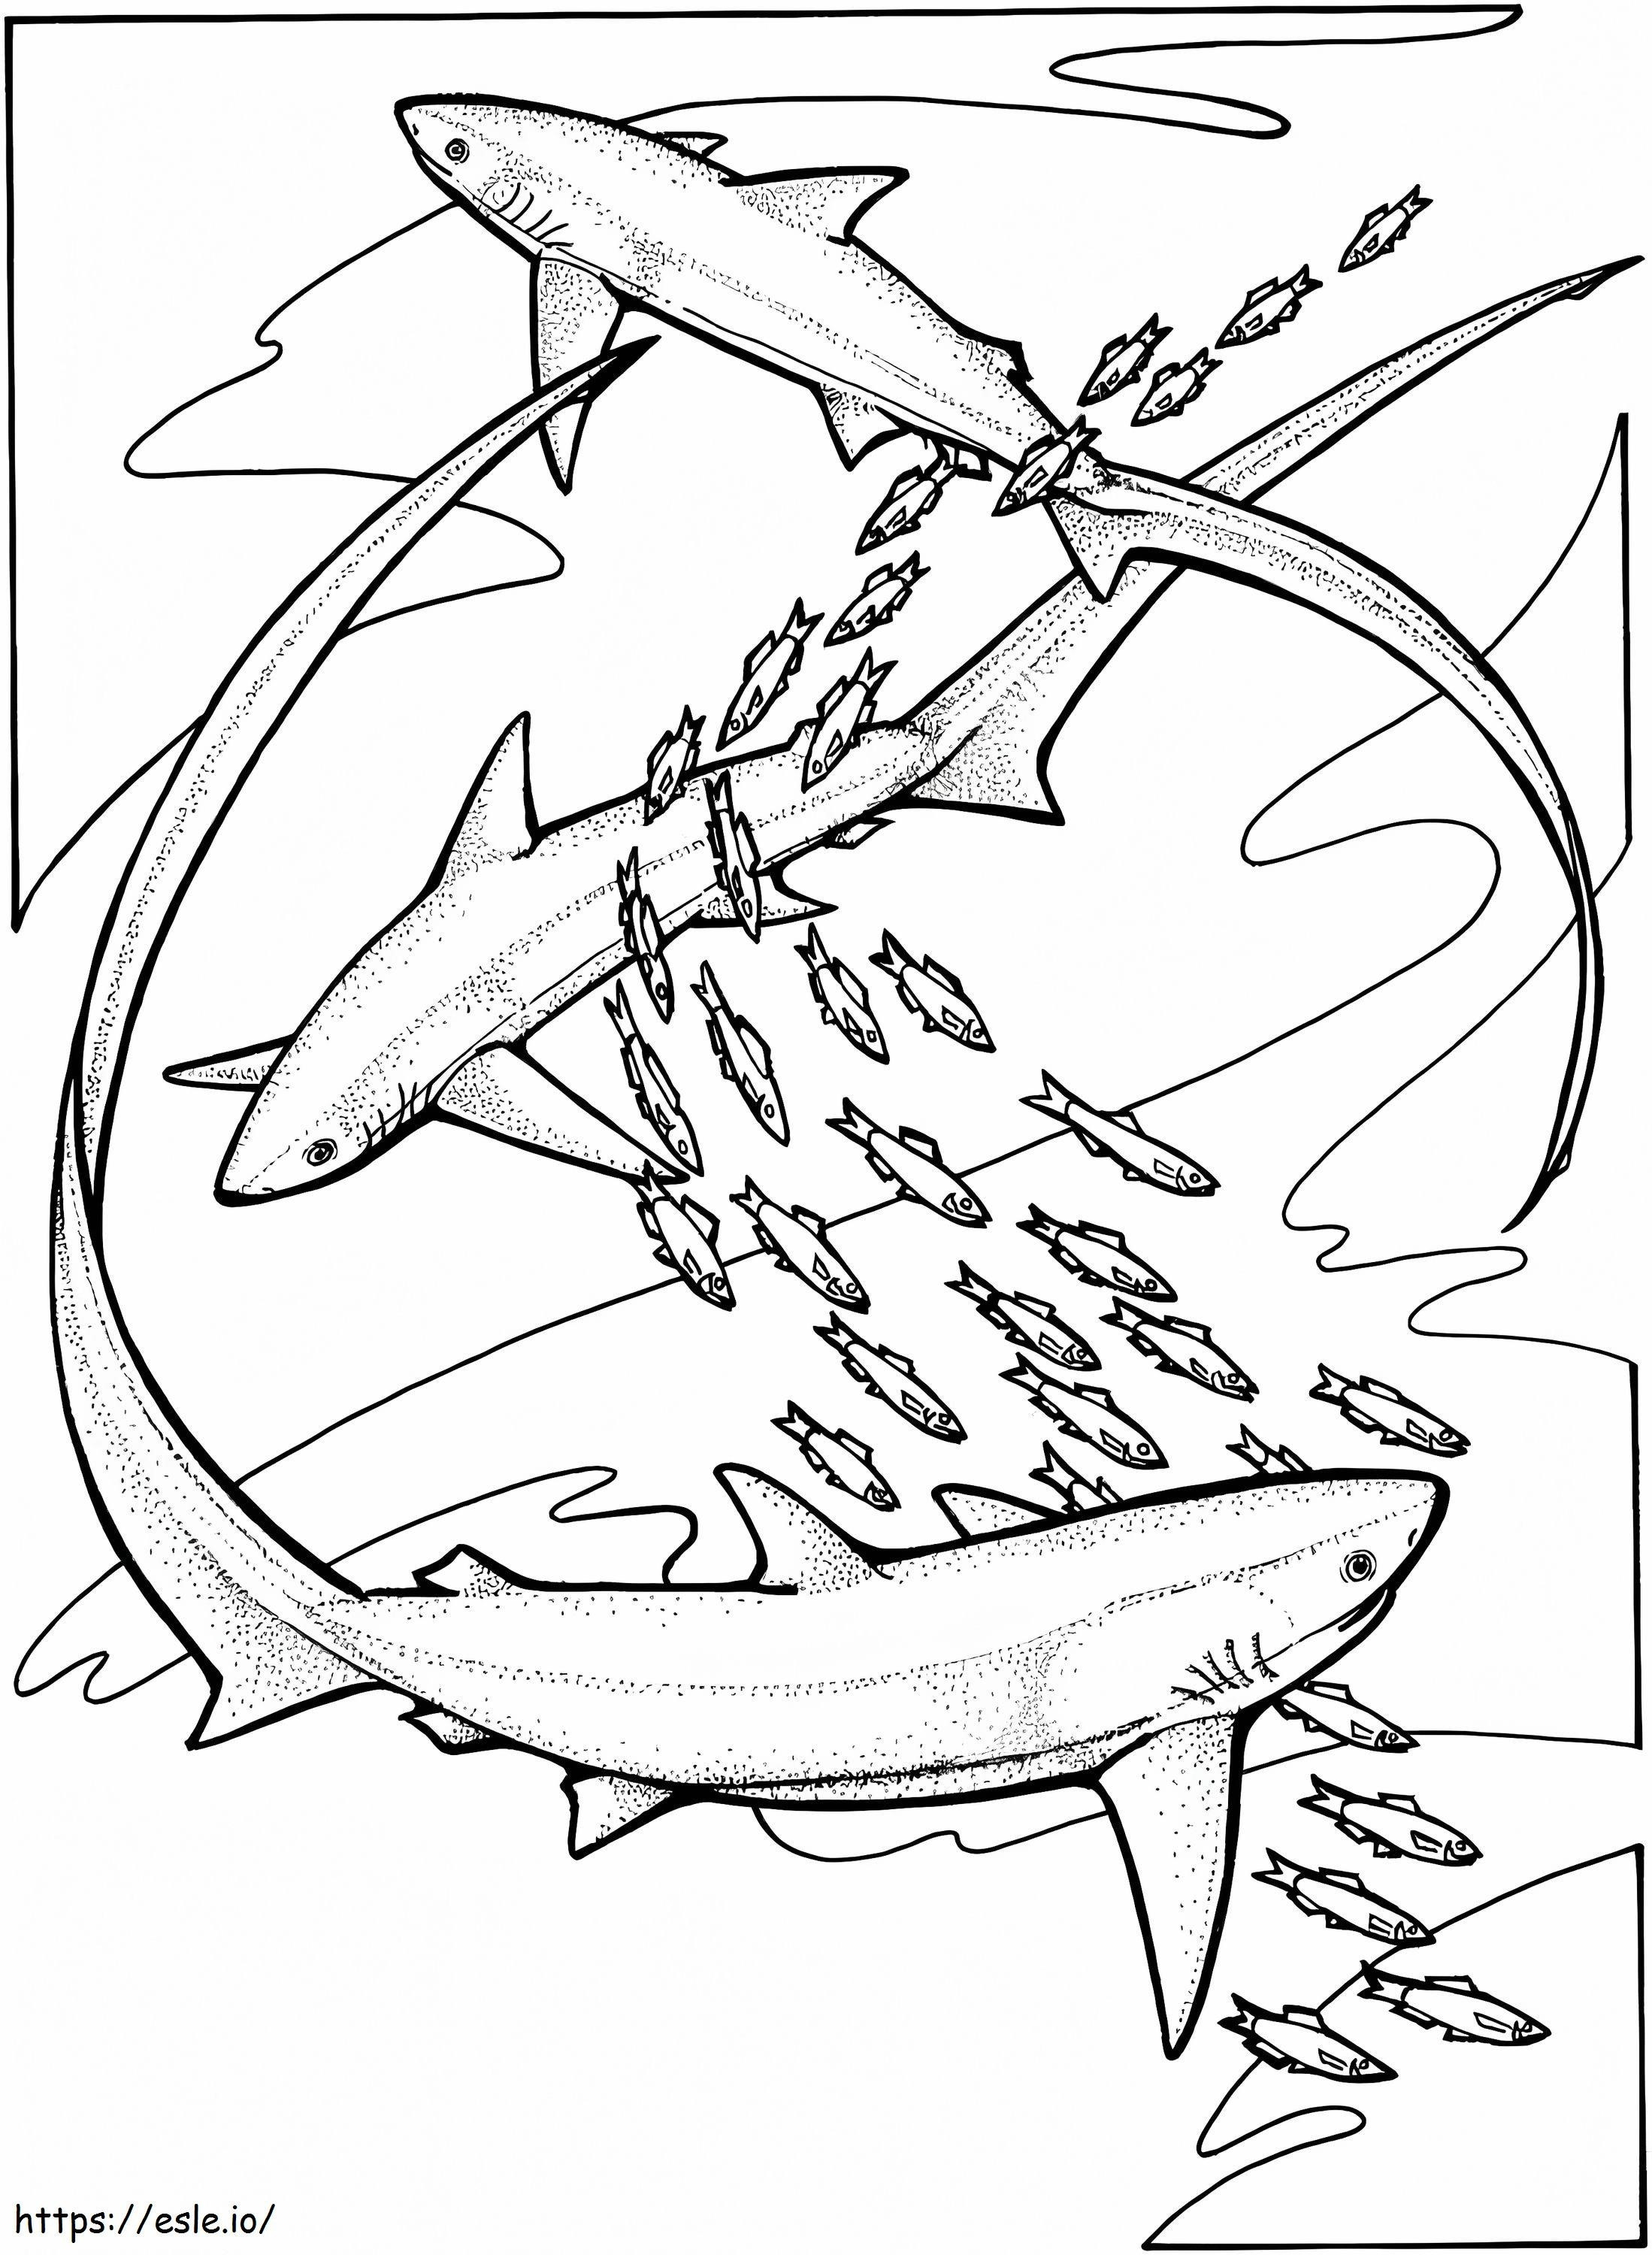 Thresher Sharks coloring page